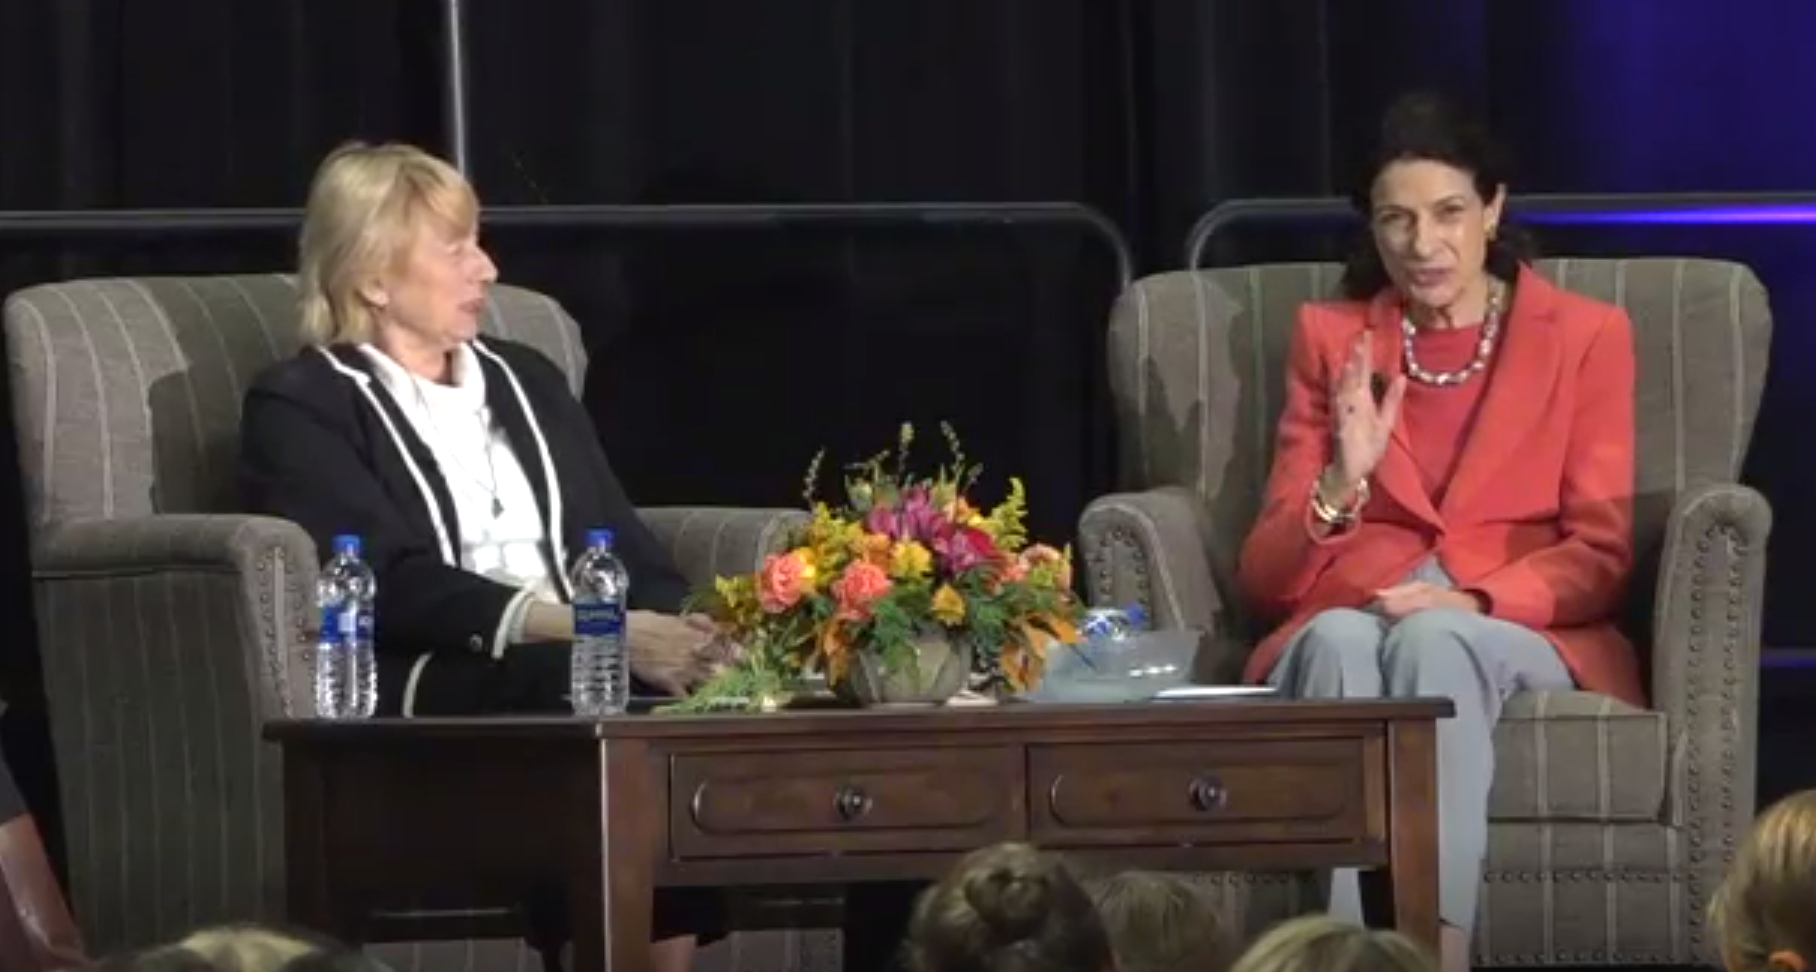 WABI: Hundreds of high school girls attend leadership conference hosted by Olympia Snowe